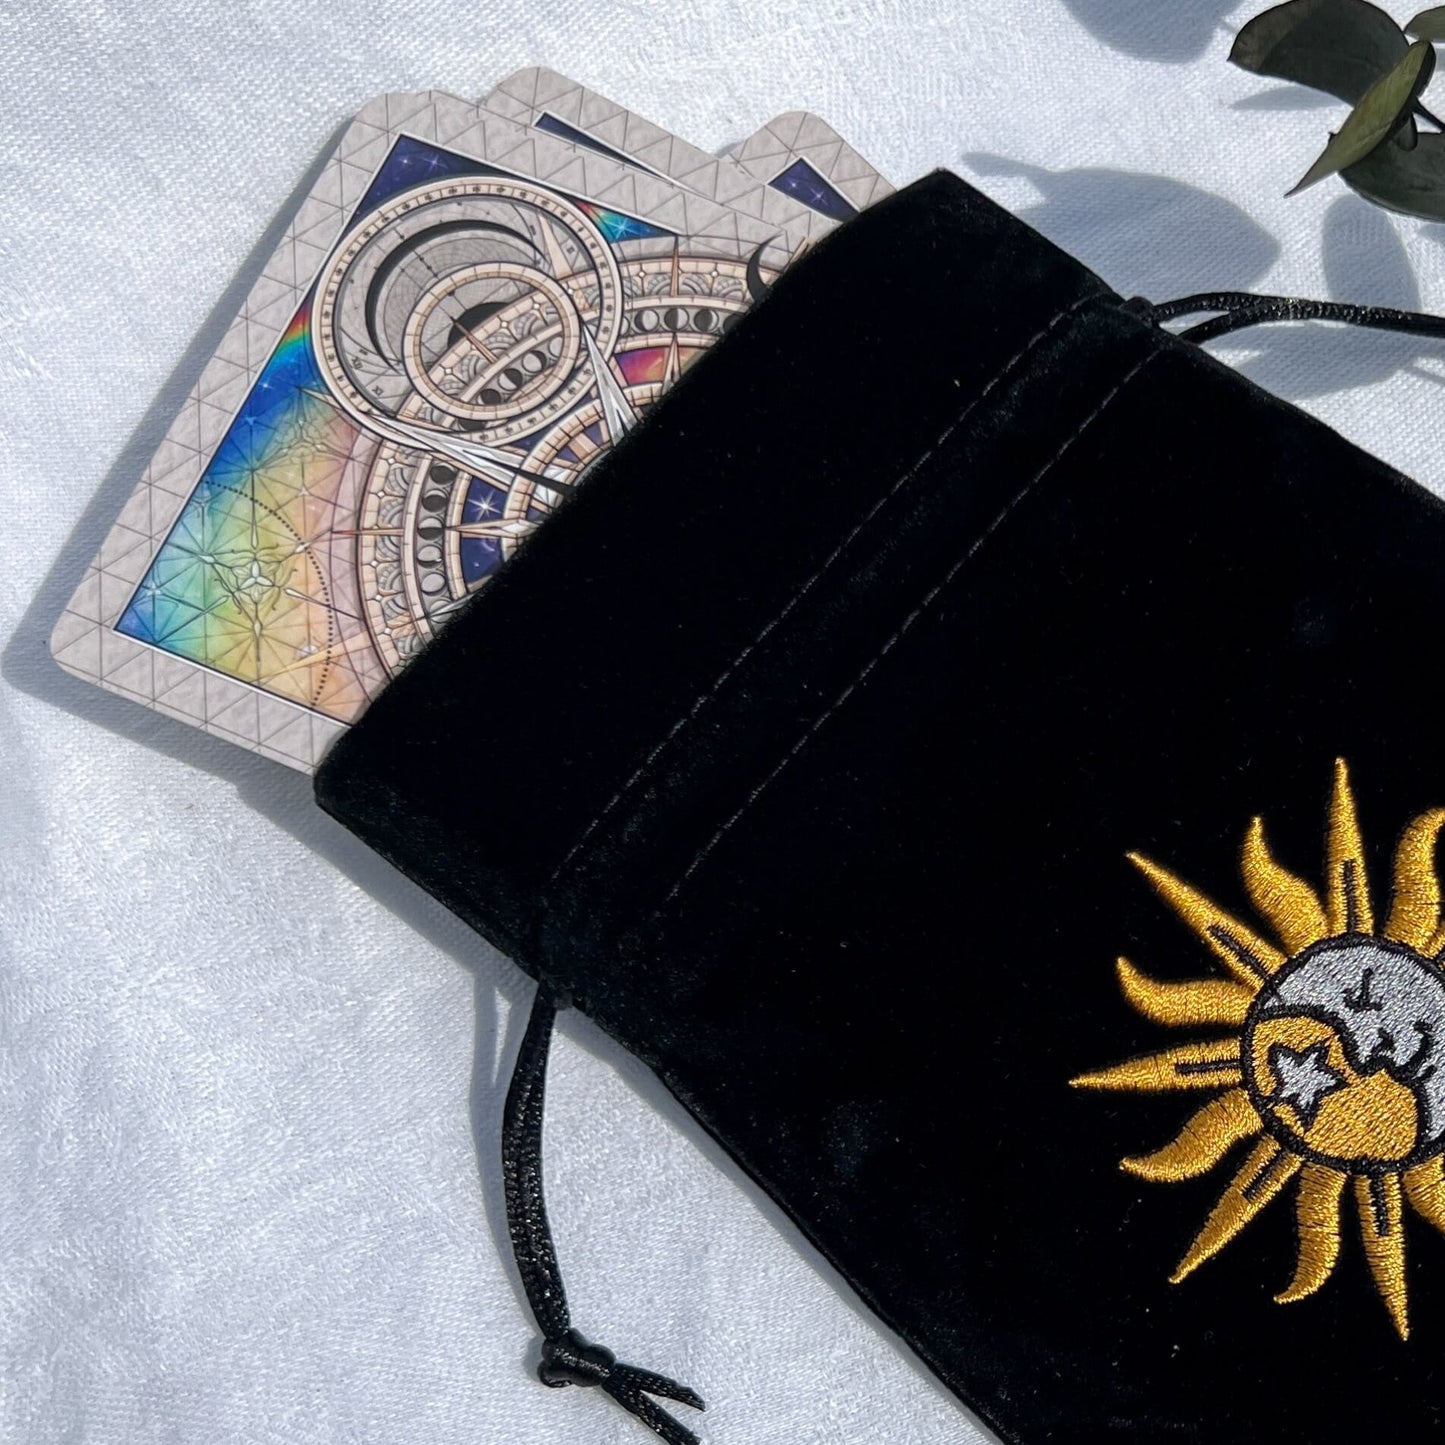 Black velvet celestial oracle card bag with an embroidered sun and moon emblem with oracle cards poking out